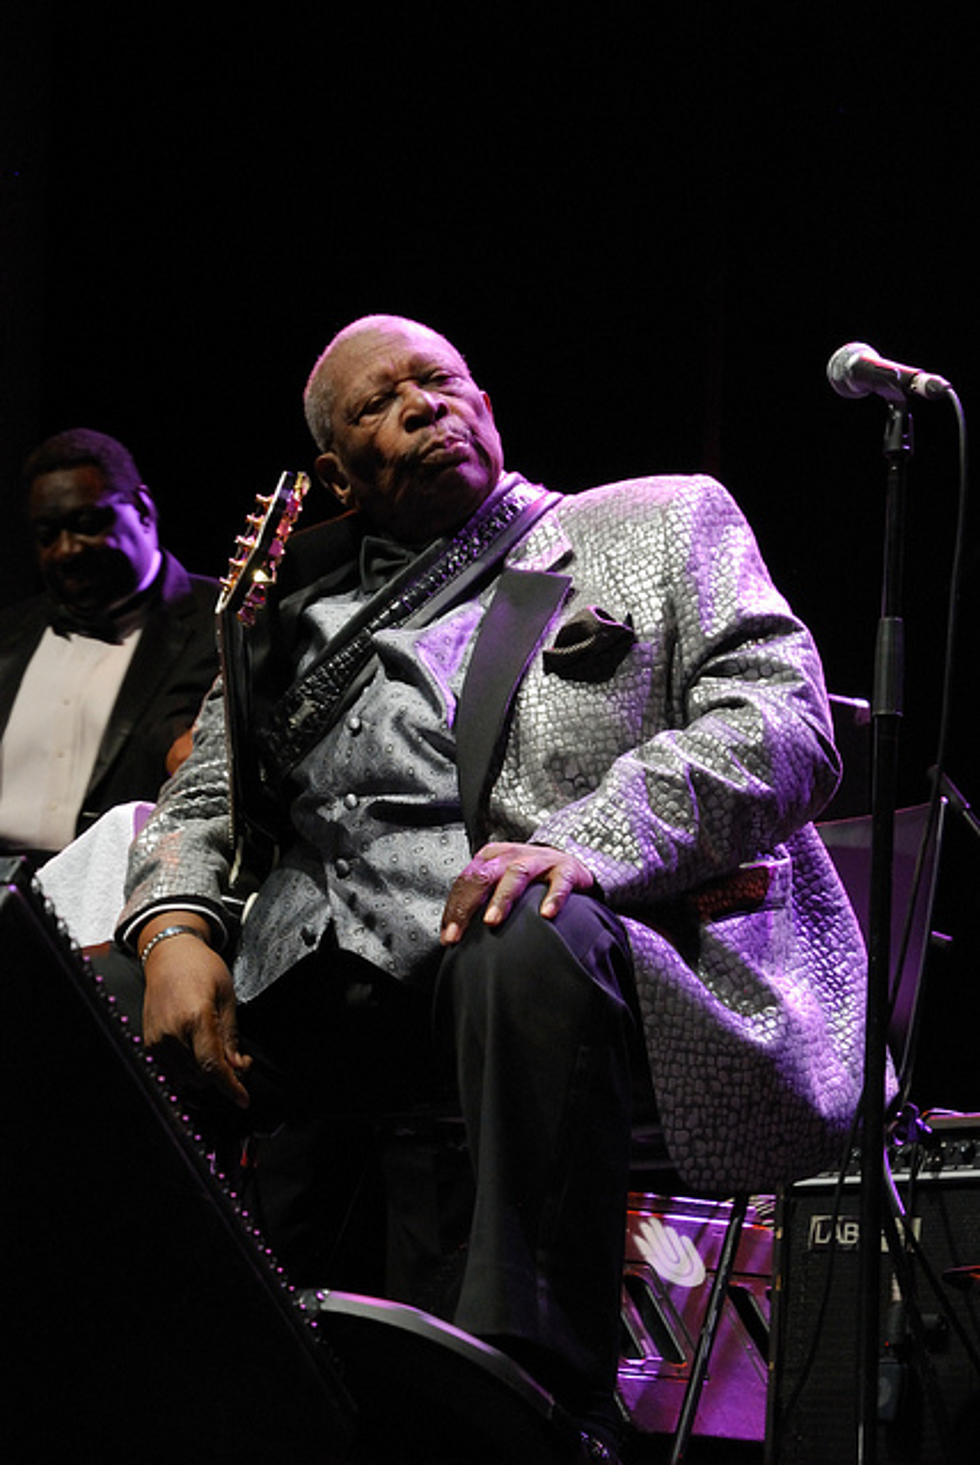 Concerts This Week Include B. B. King at Red Rocks